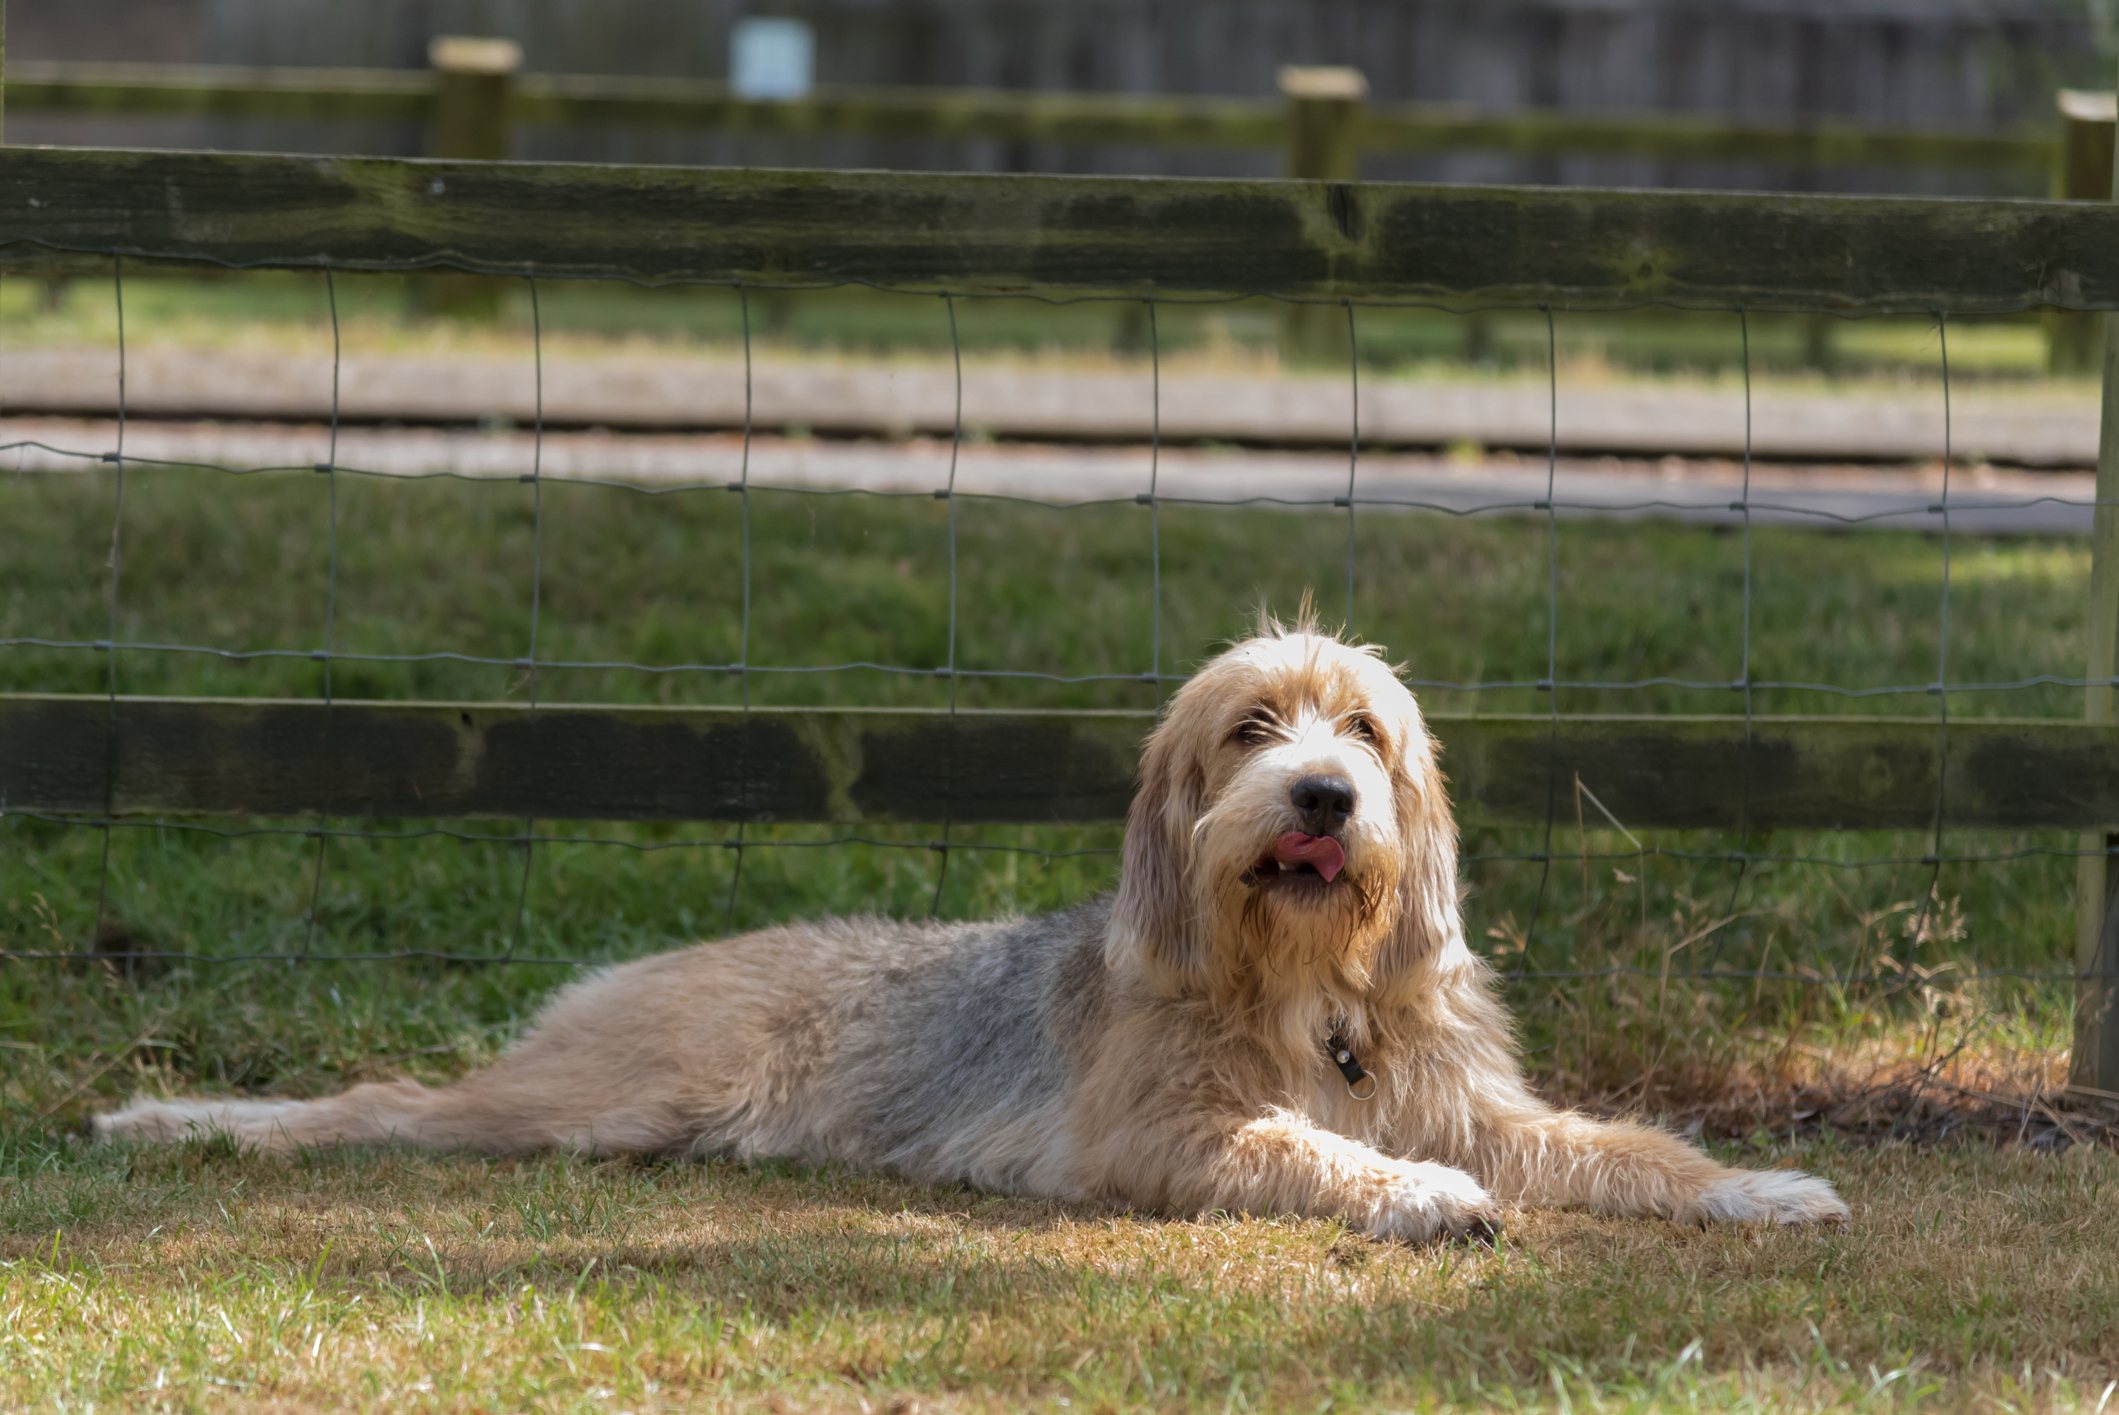 Otterhound lying down stretched out by a fence in the shade